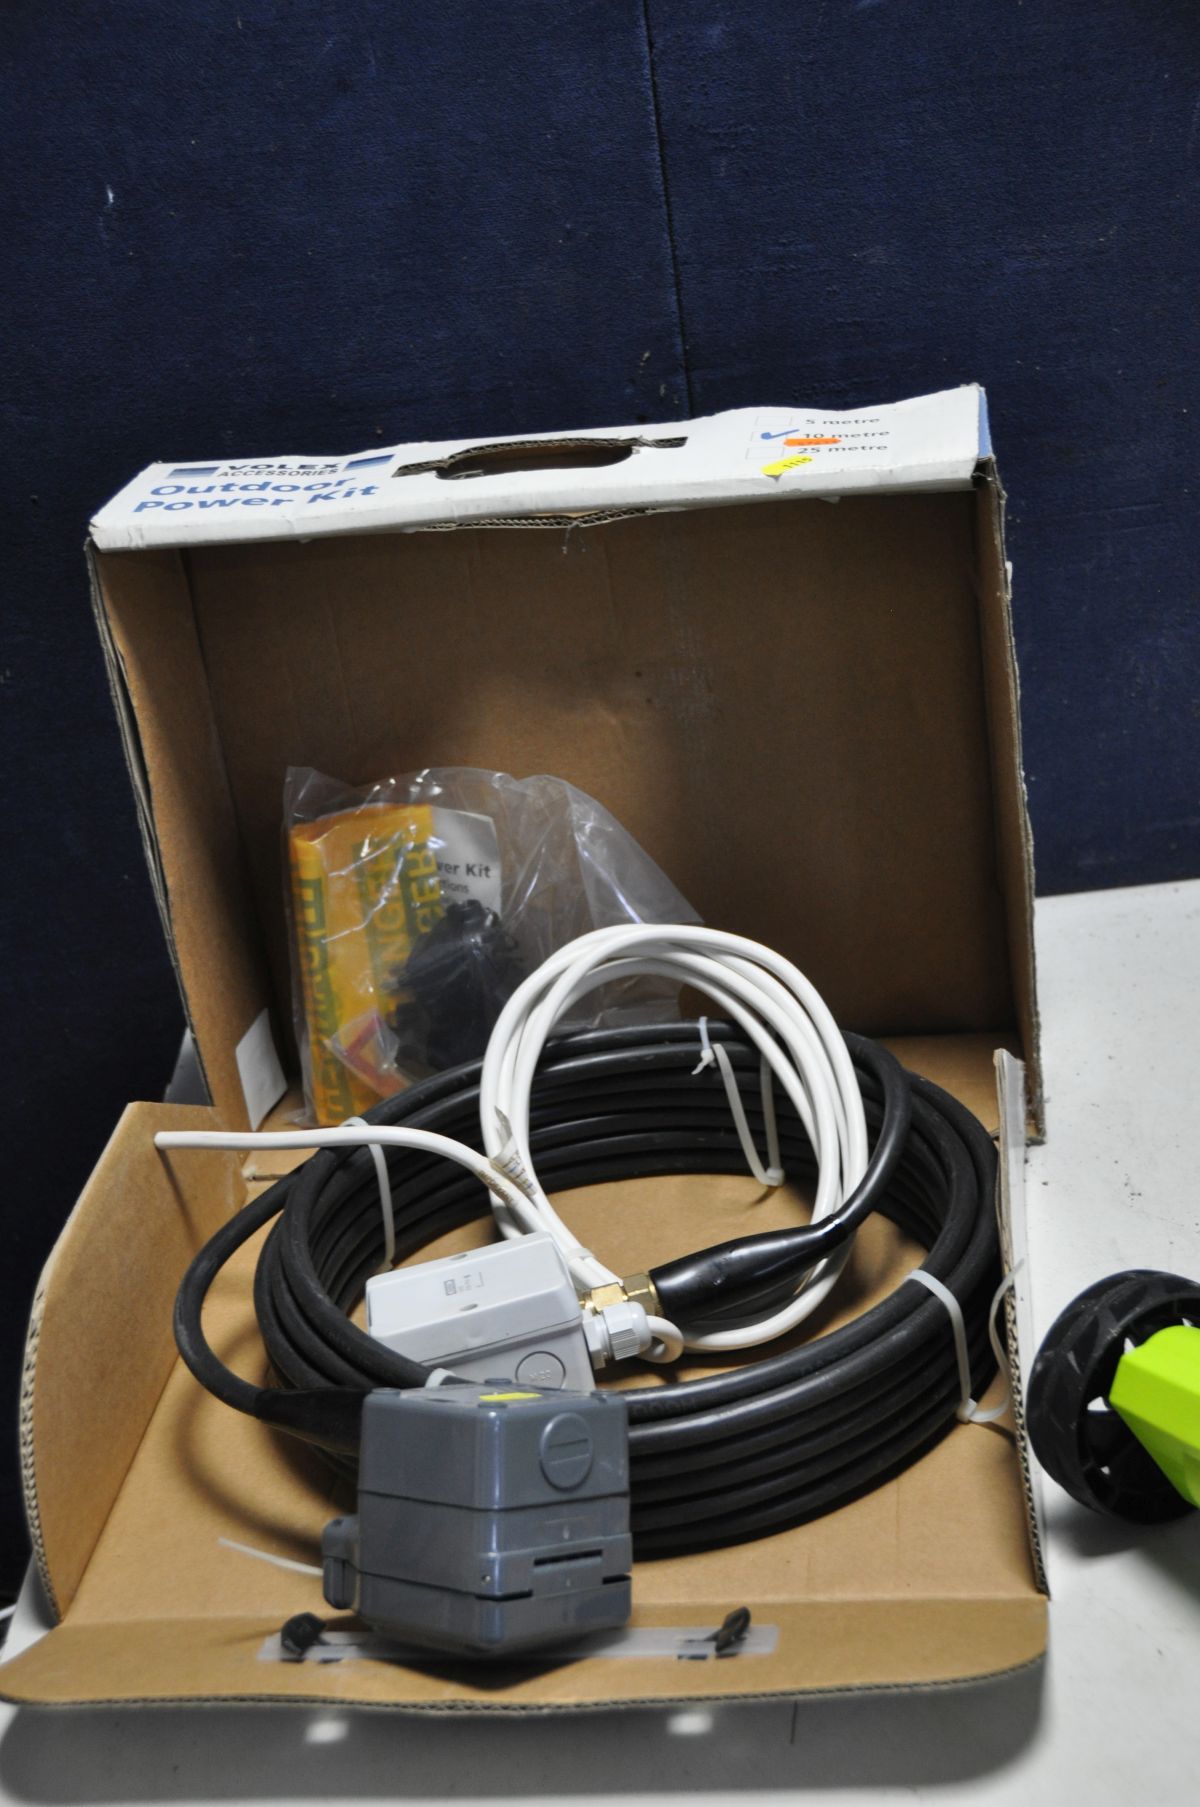 A VOLEX 10m OUTDOOR POWER KIT in box with a Garden Gear weed sweeper (PAT pass and working) (2) - Bild 2 aus 3